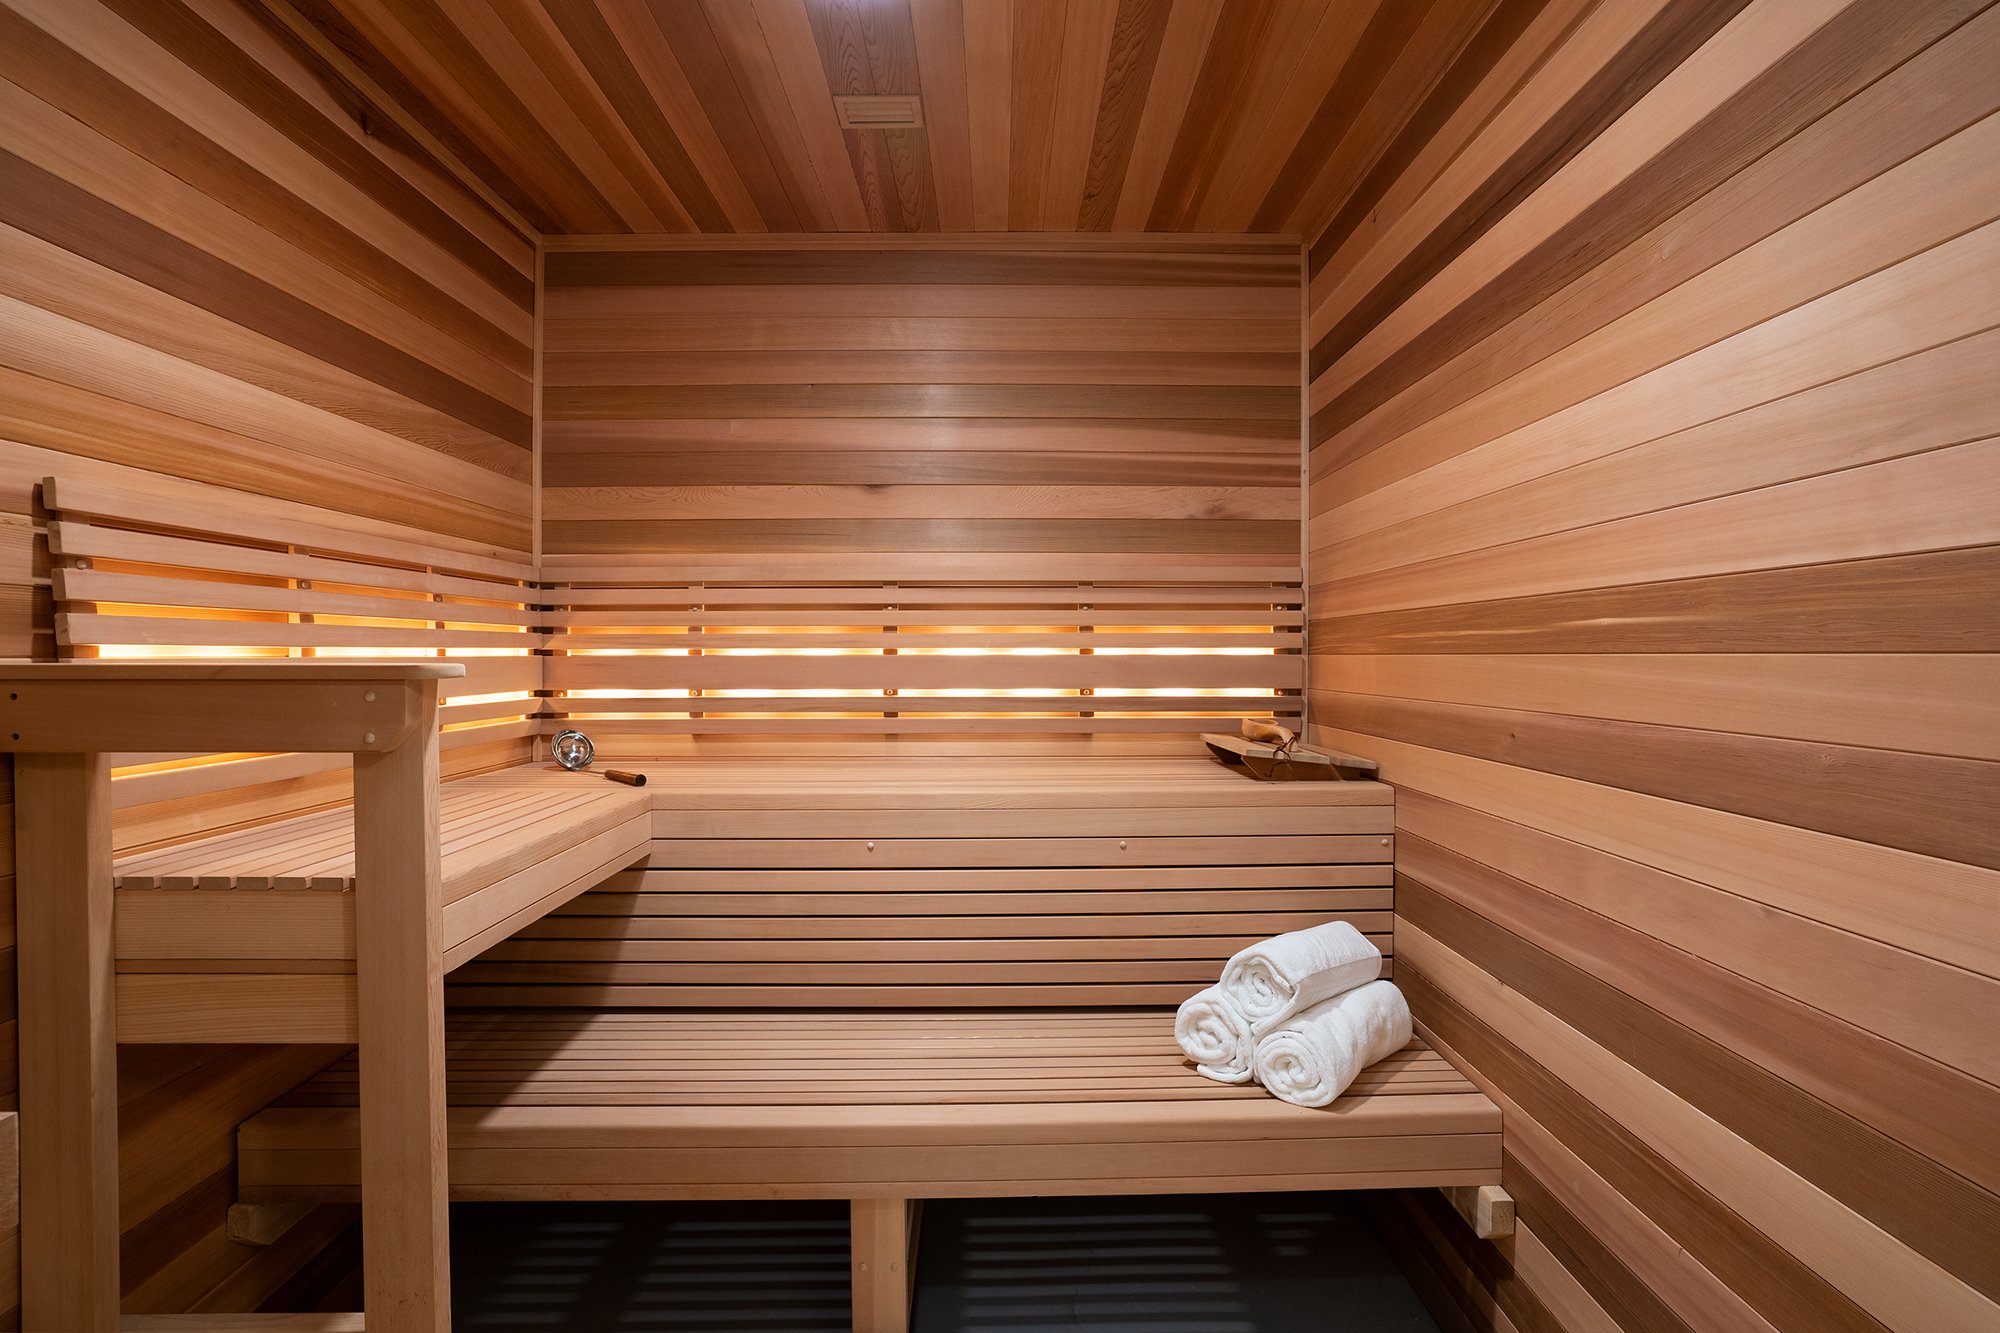 Tahoe Beach Club's spa features a modern wood sauna and fresh, white towels. (Copy) (Copy)